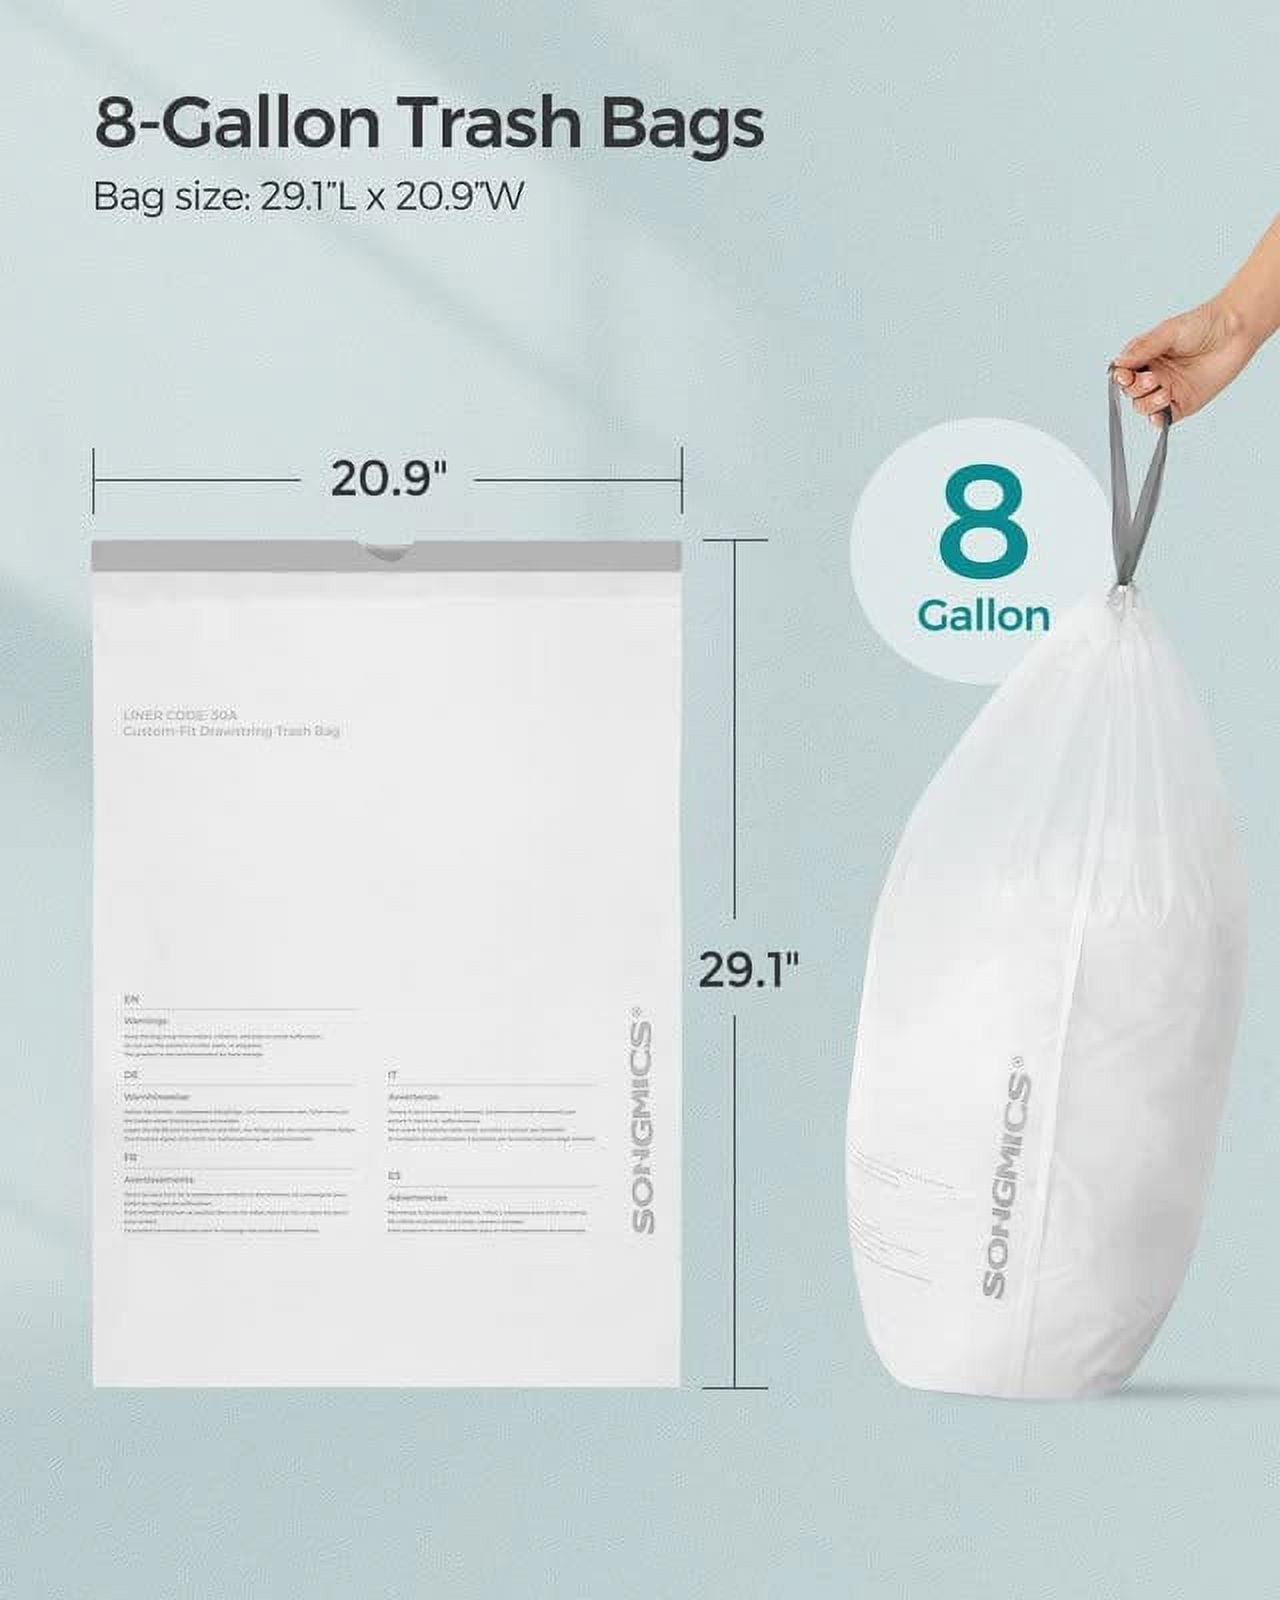 SONGMICS Trash Bags for 13.2 Gallon Trash Cans, Drawstring Garbage Bags,  Liner Code 050A, 1 Roll, 40 Count, White UKRB050A01 - Yahoo Shopping